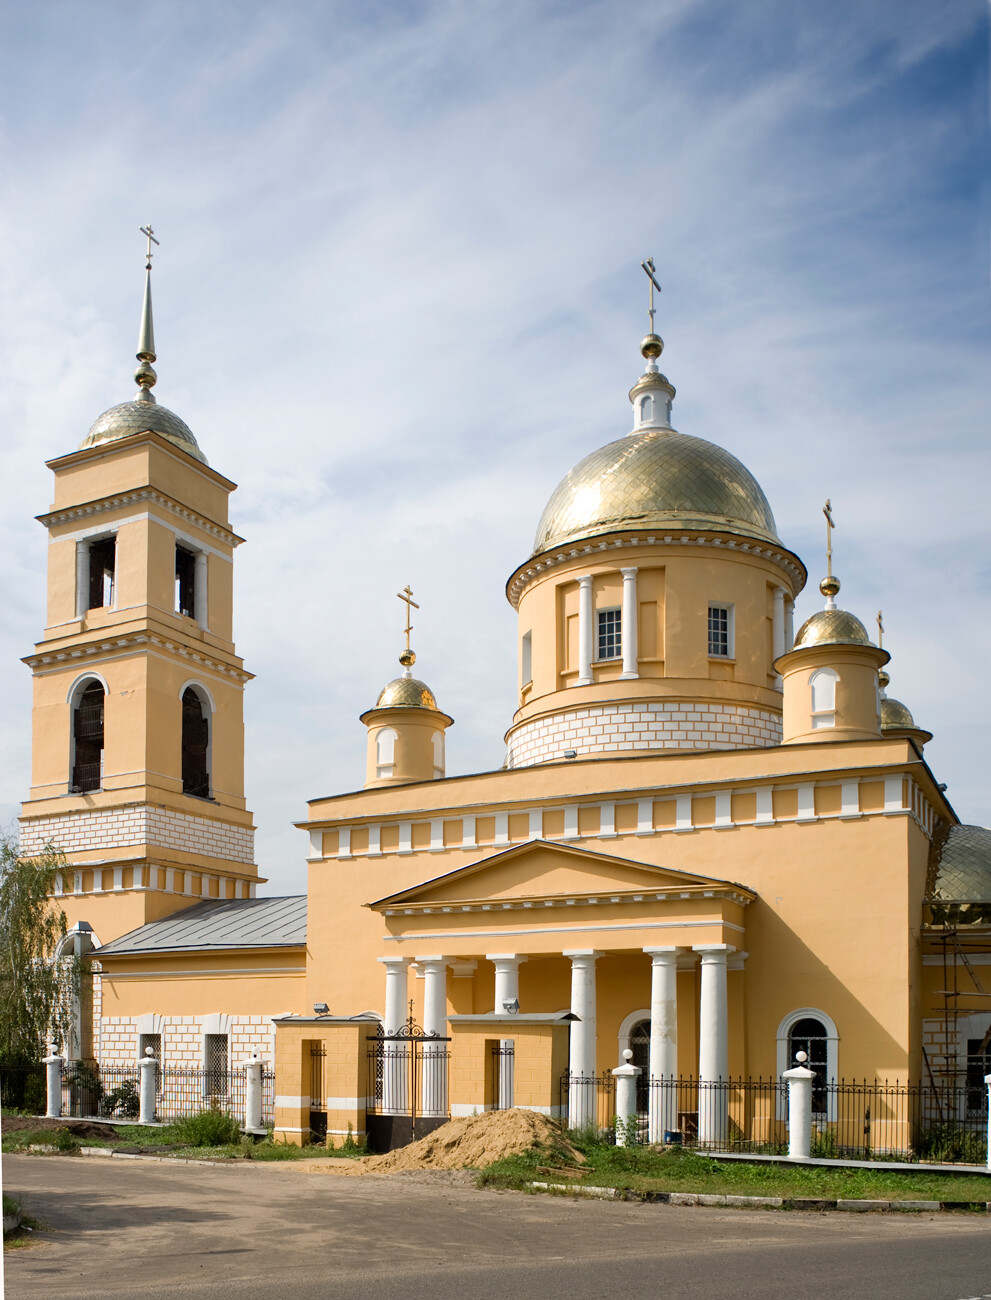  Kashira. Cathedral of the Dormition, south view. Built in 1829-42 in a late Neoclassial style promulgated by the architect Apollon Grigorev. August 4, 2012